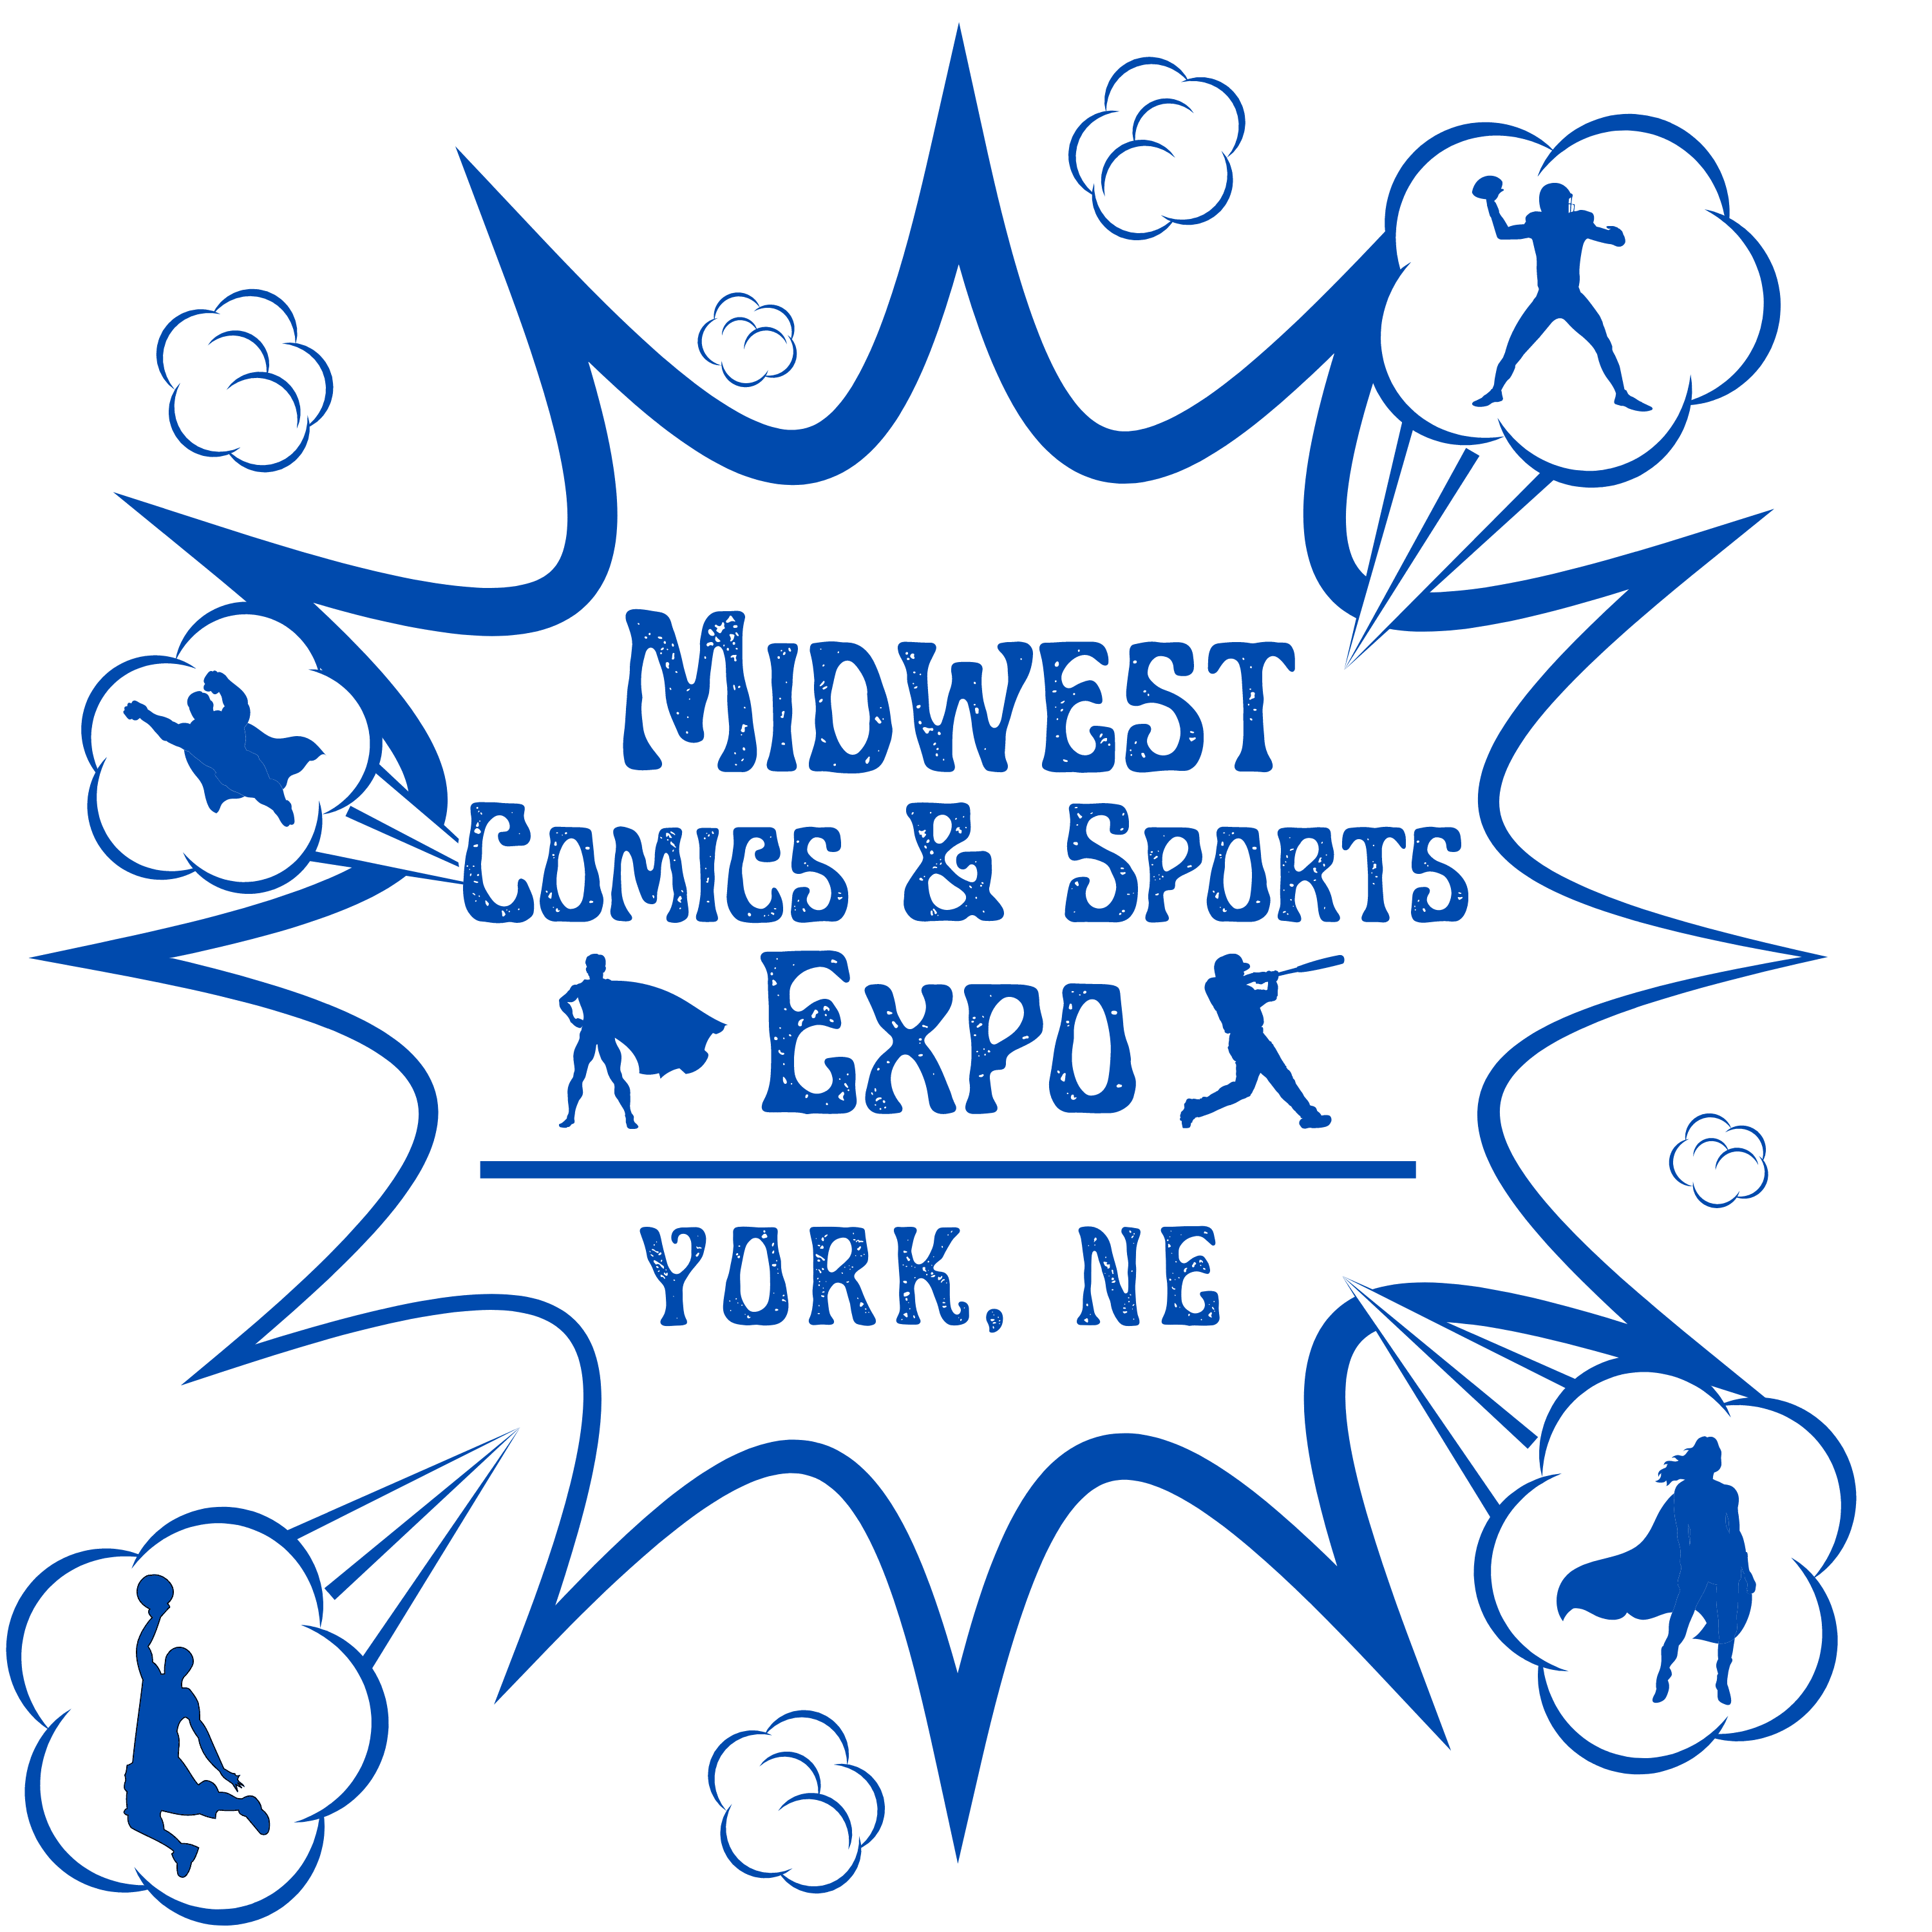 Come check out the Midwest Comics & Sports Expo! Vendors from across the region will be heading to York with an amazing selection of comic books, illustrations, comic related toys/novelty items, sports cards & memorabilia. Get up close with the artists an